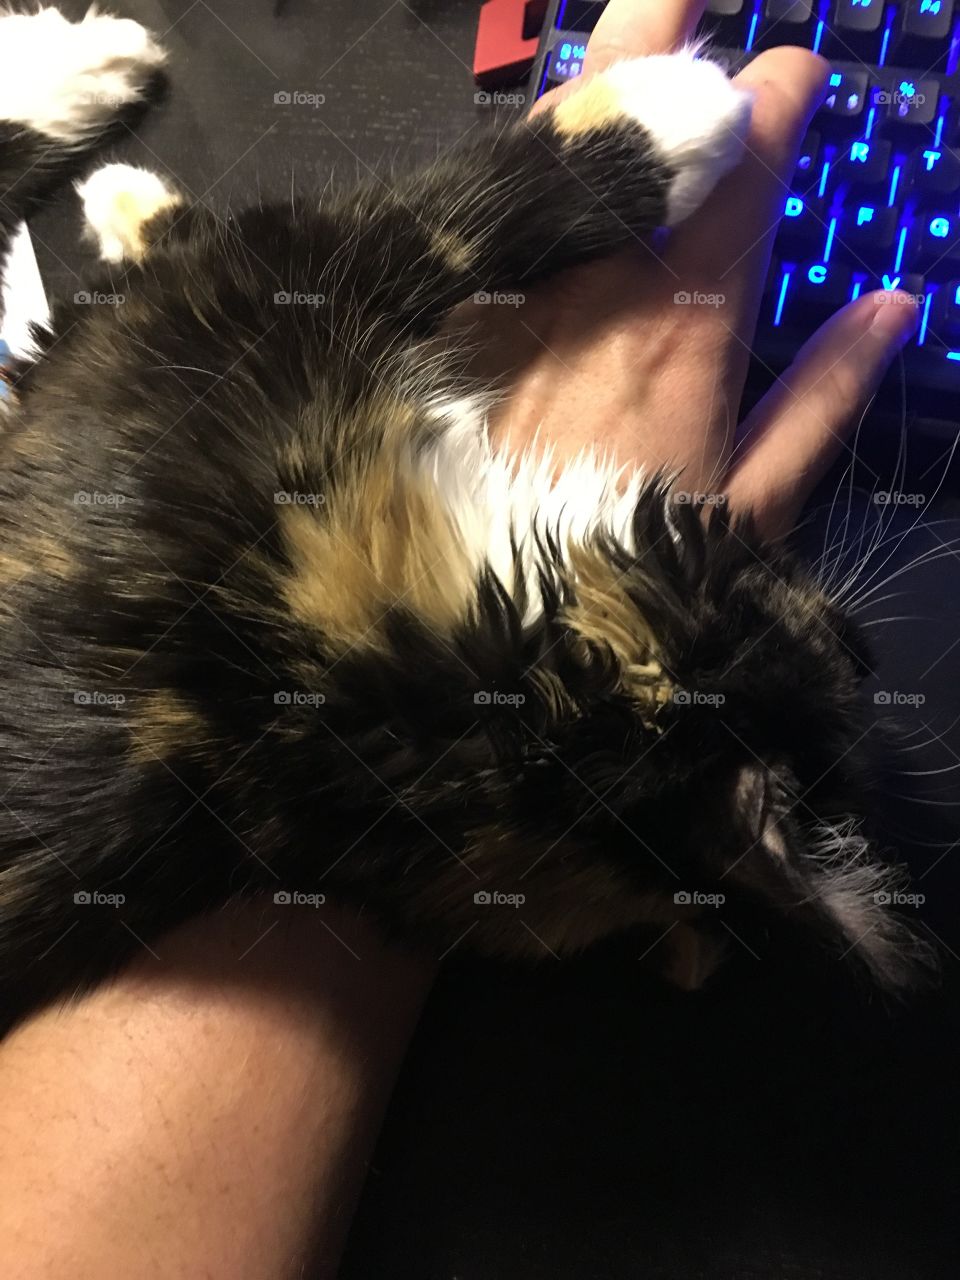 Gaming with cat its impossible